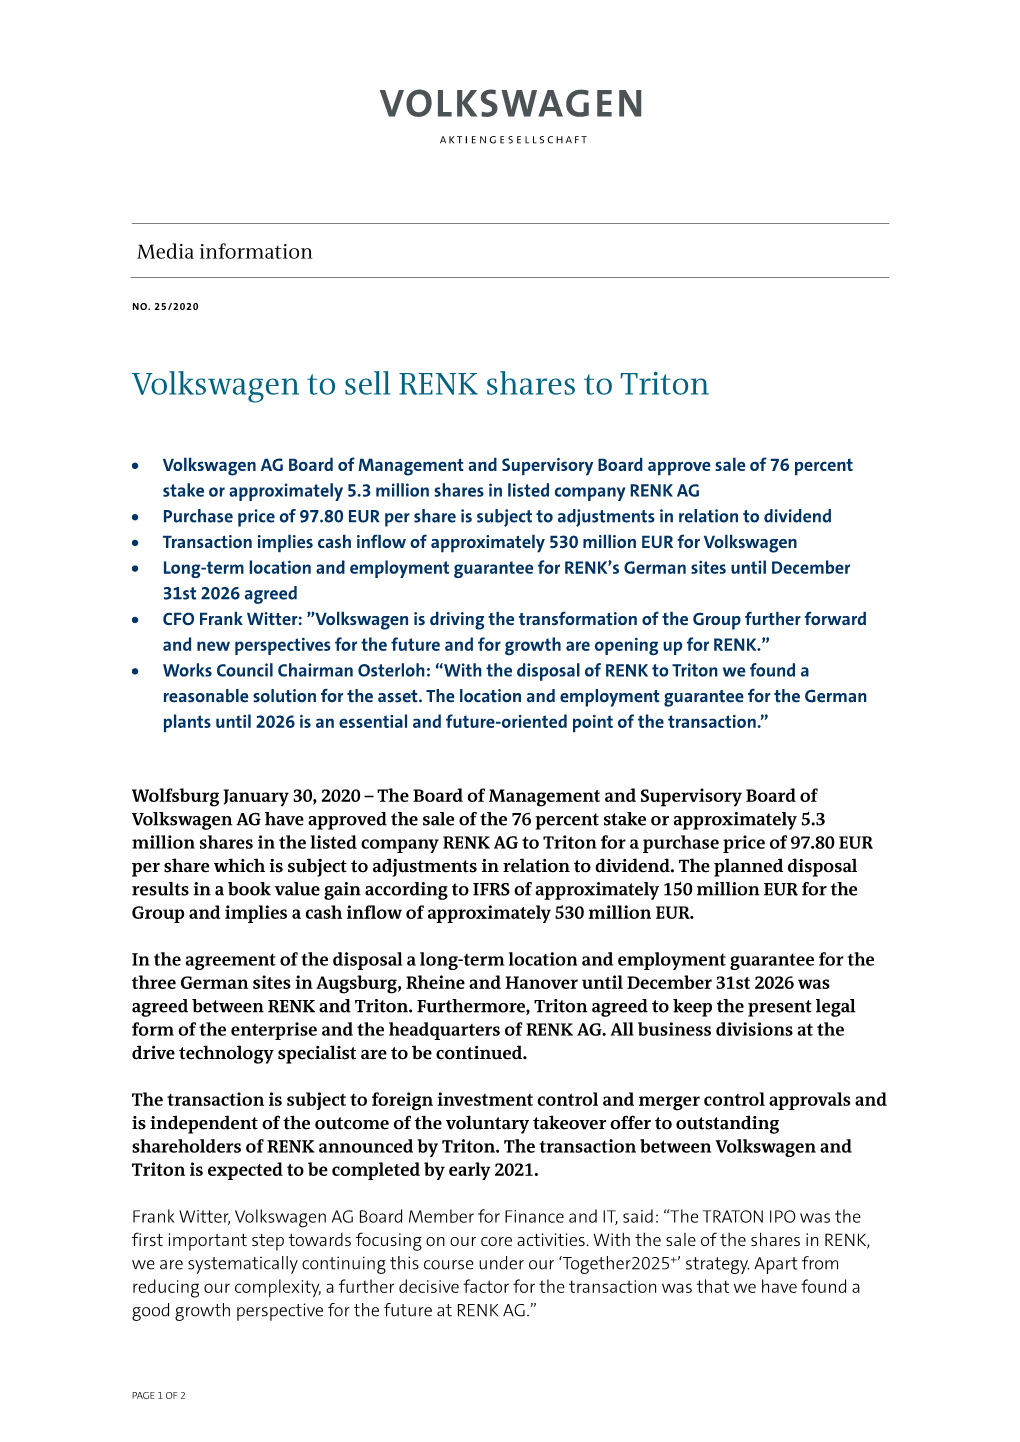 Volkswagen to Sell RENK Shares to Triton